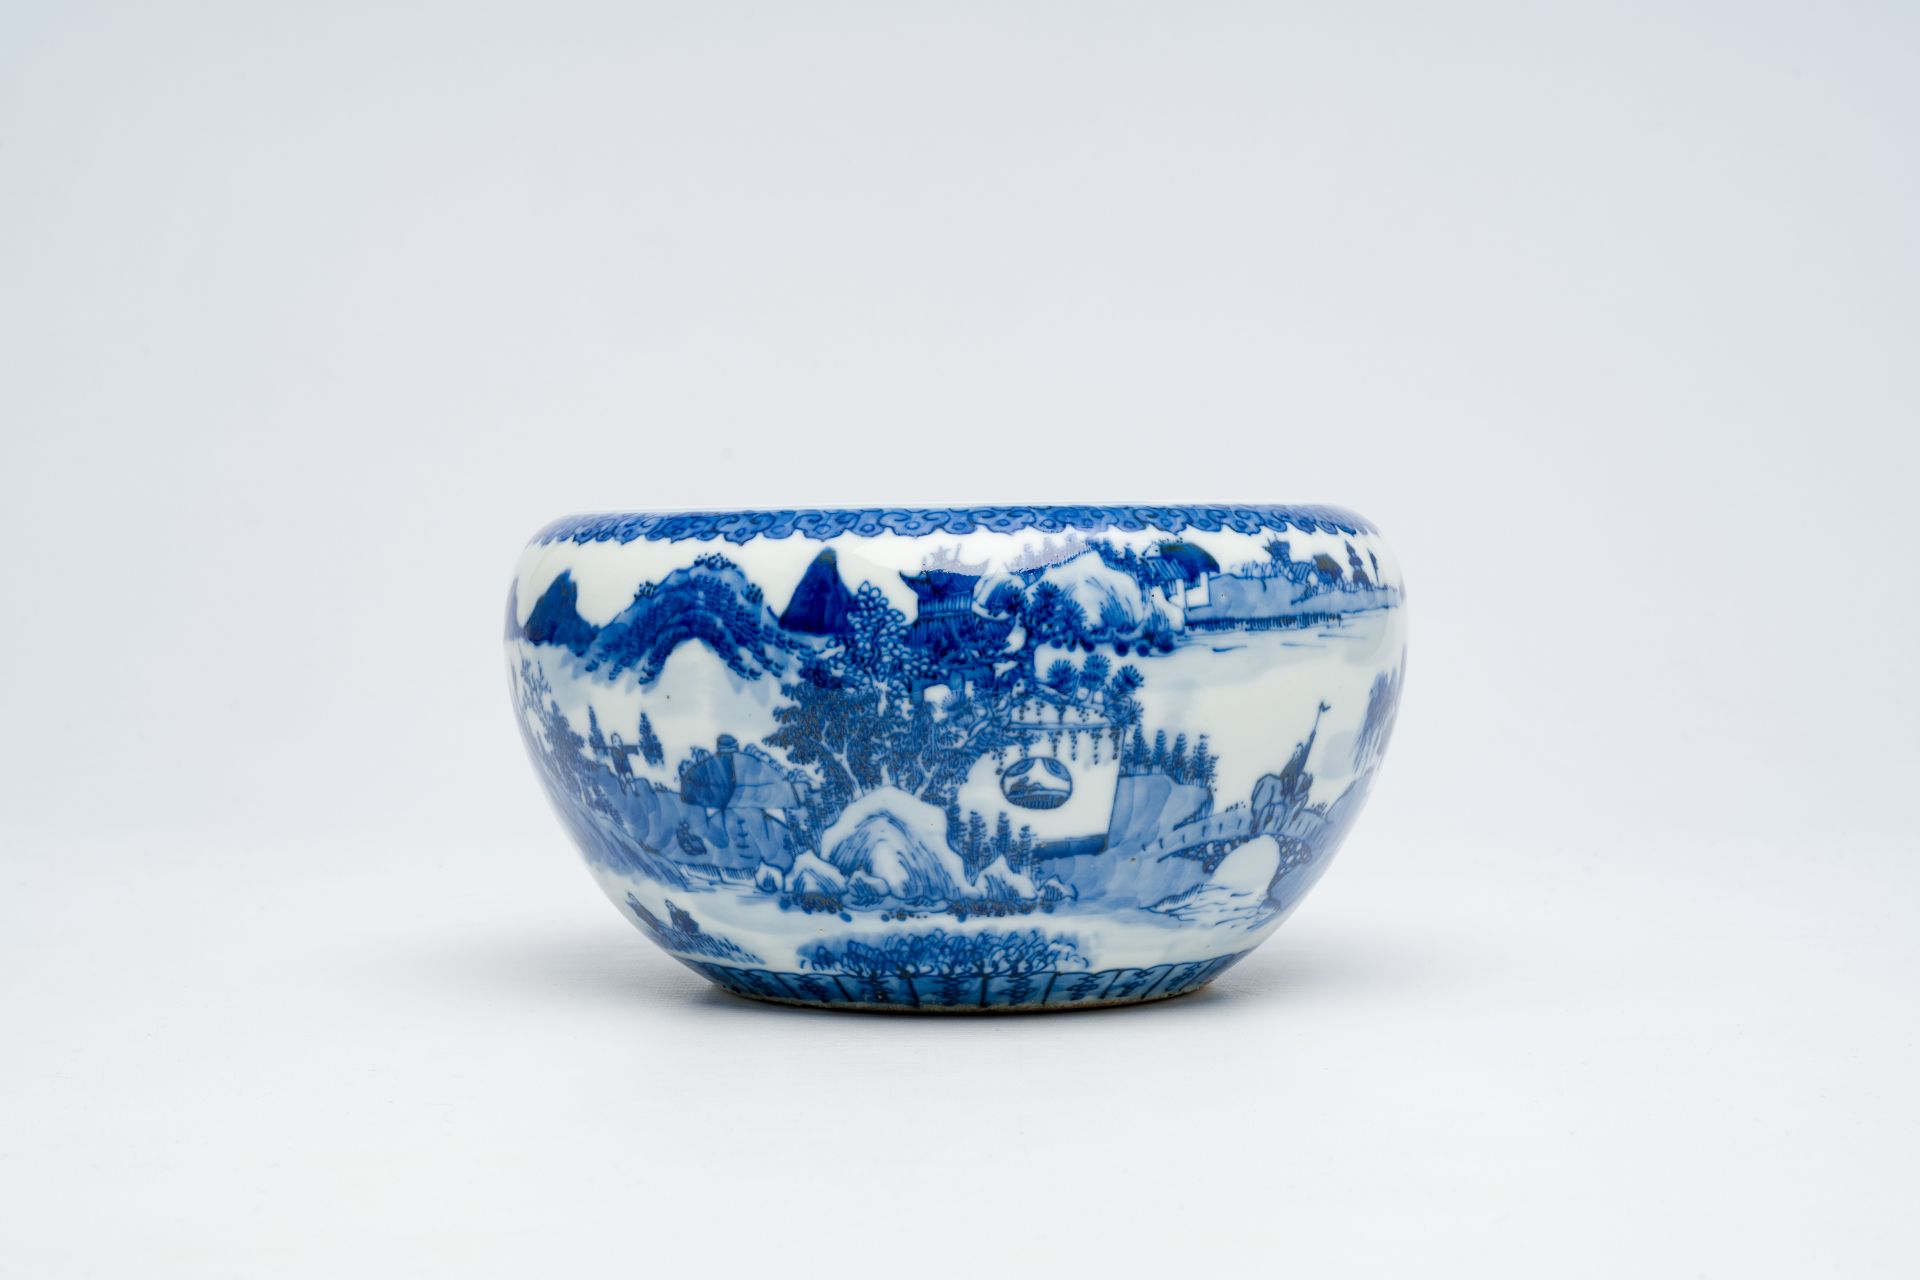 A varied collection of Chinese blue and white porcelain, 19th/20th C. - Image 20 of 30